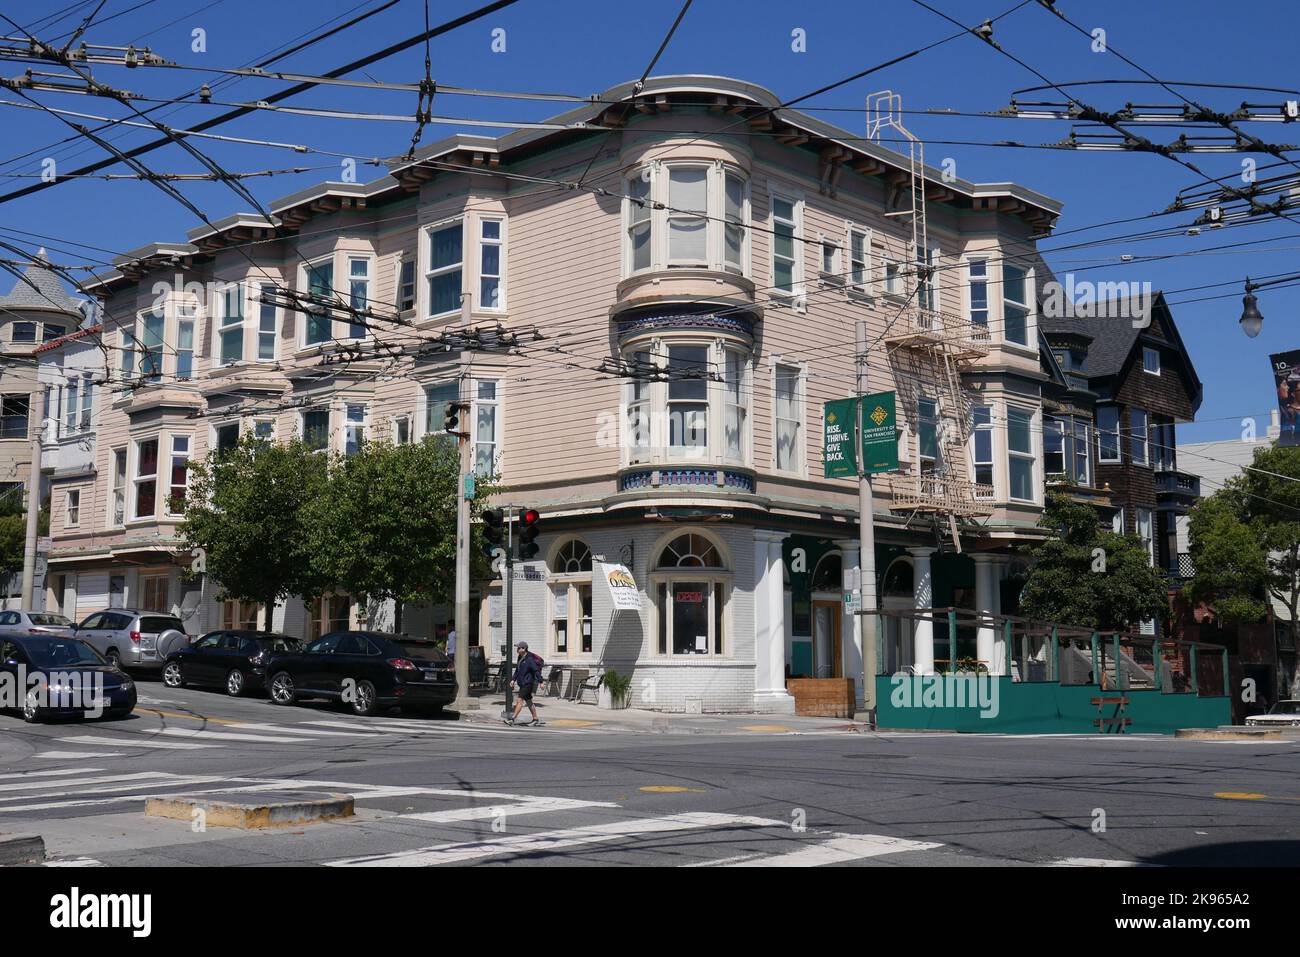 A view of the McCallister and Divisadero intersection in San Francisco, California, looking towards an apartment building with Oasis Cafe. Stock Photo